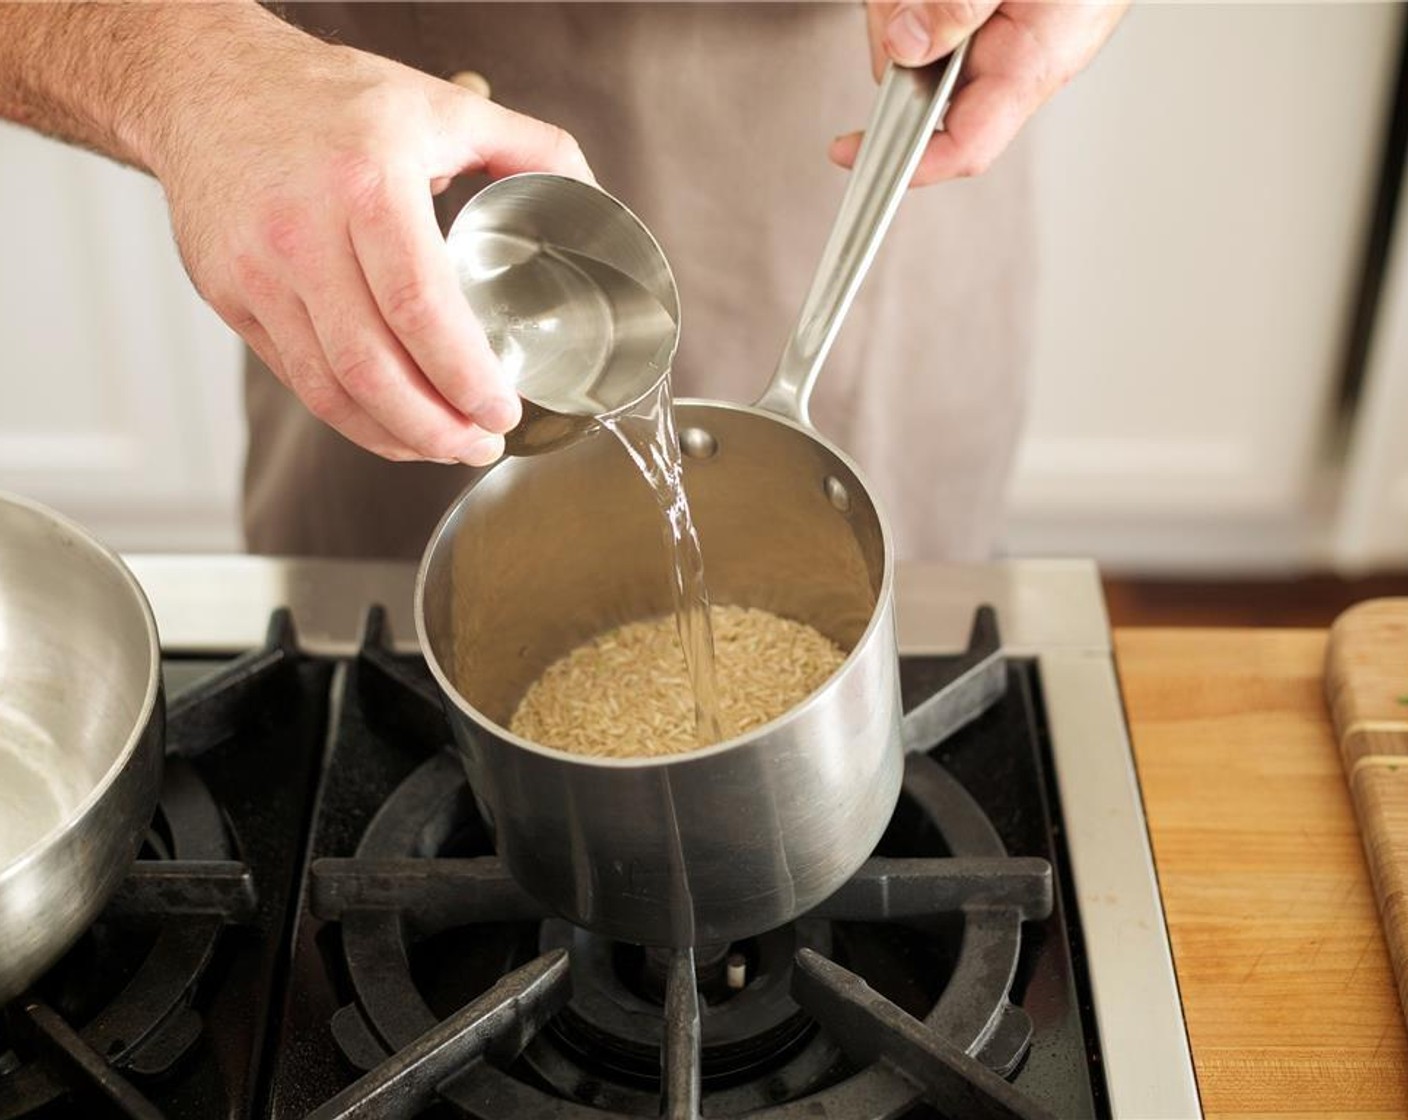 step 2 Add Brown Rice (2/3 cup) to small saucepan with one cup of cold water. Stir, bring to a boil over high heat, cover and lower heat to a simmer. Cook for 28 minutes or until rice is tender. Remove from heat, fluff rice, and keep covered until plating.